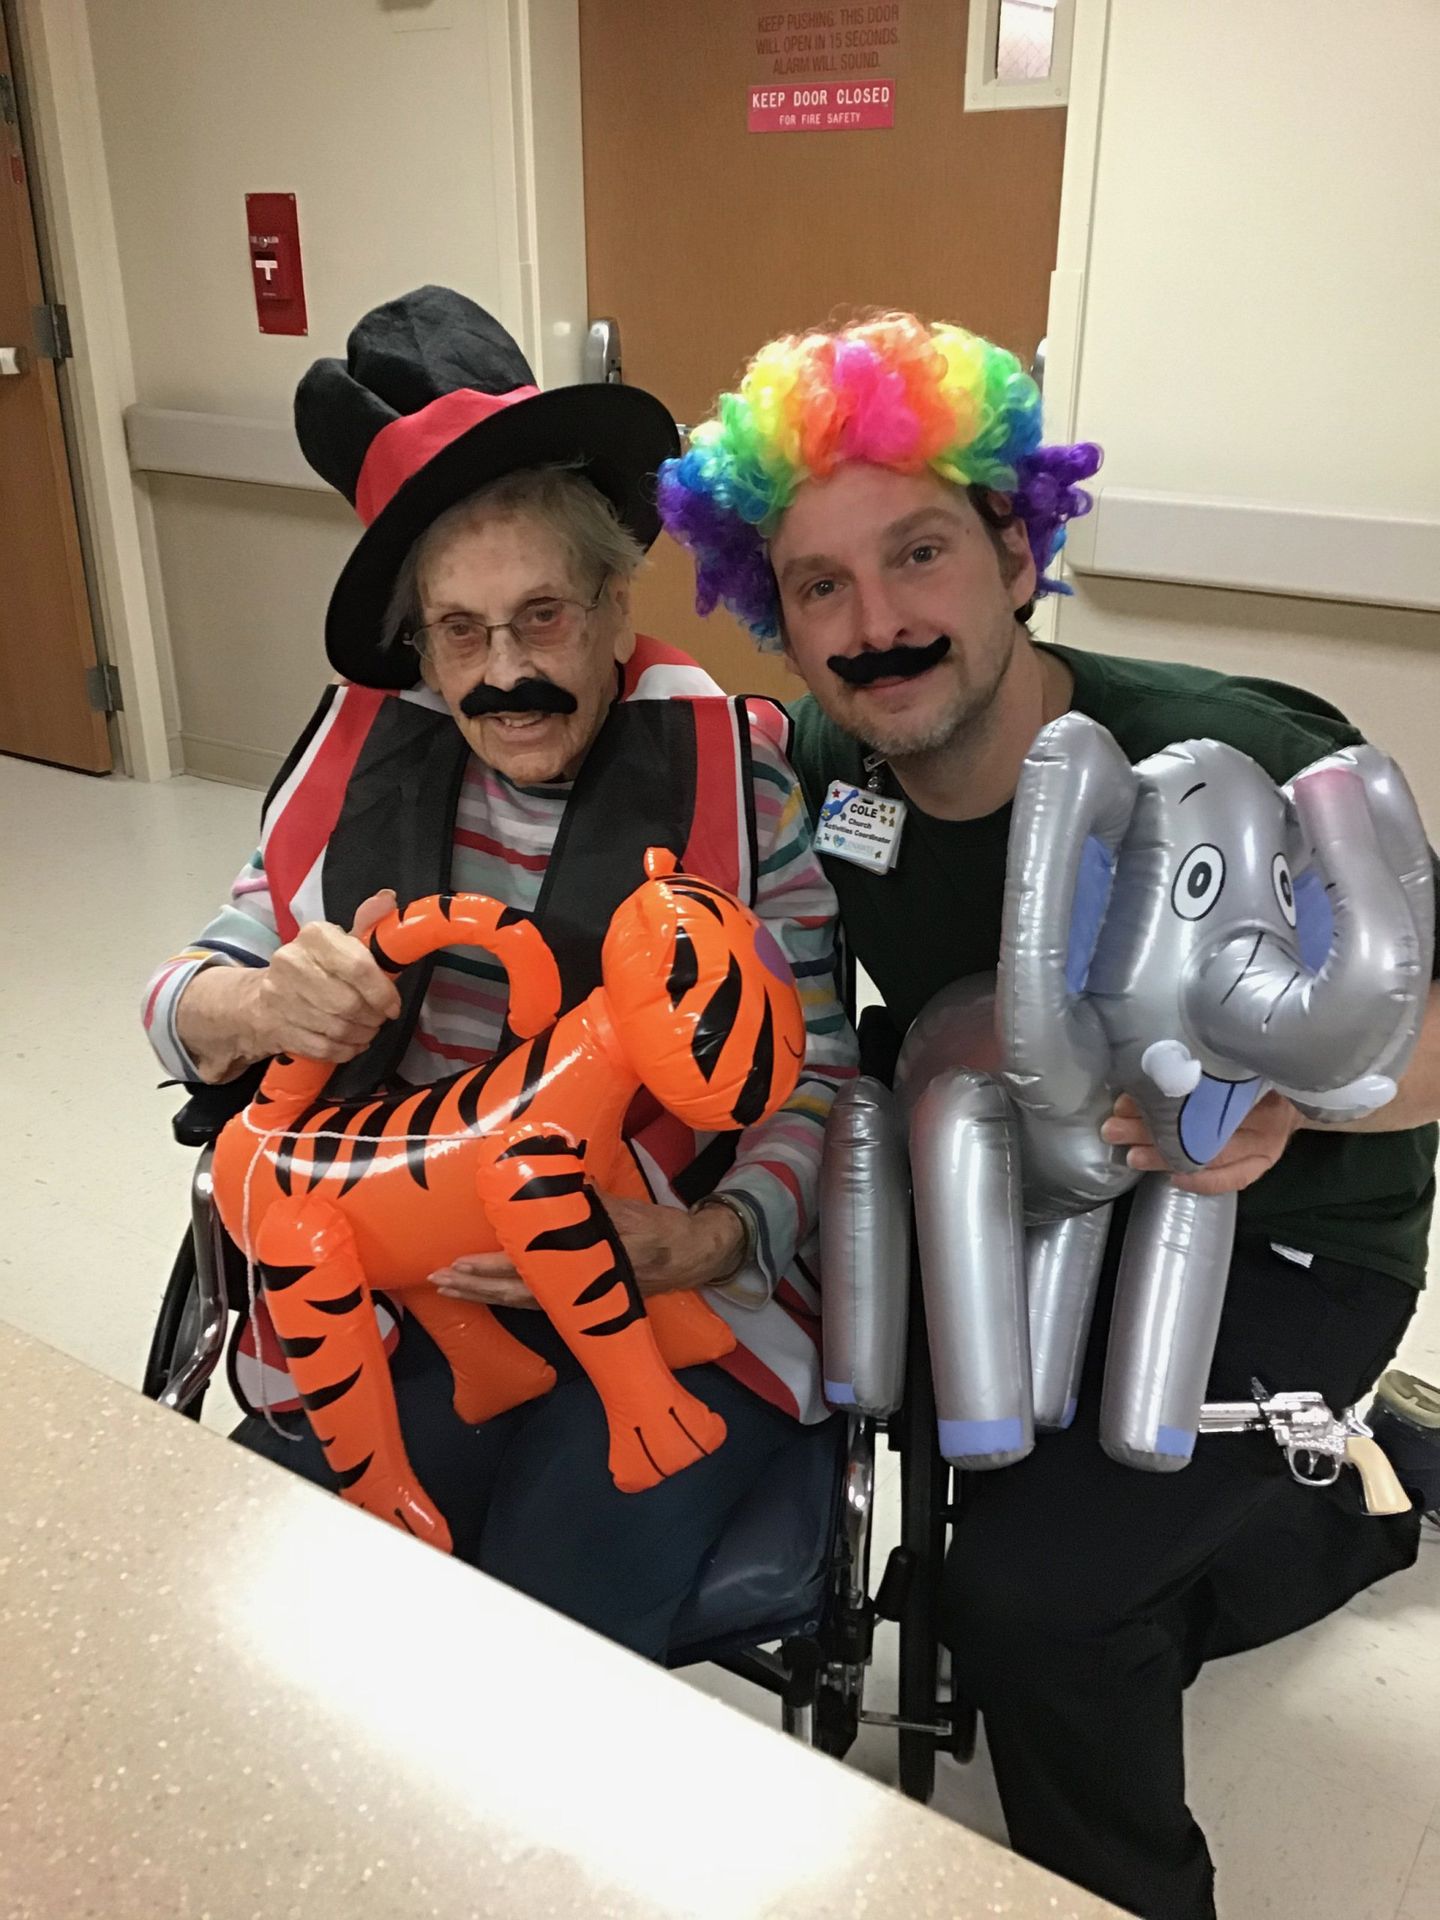 Elder posing with staff member wearing hats and holding balloon animals at Lenawee Medical Care Facility in Adrian, MI